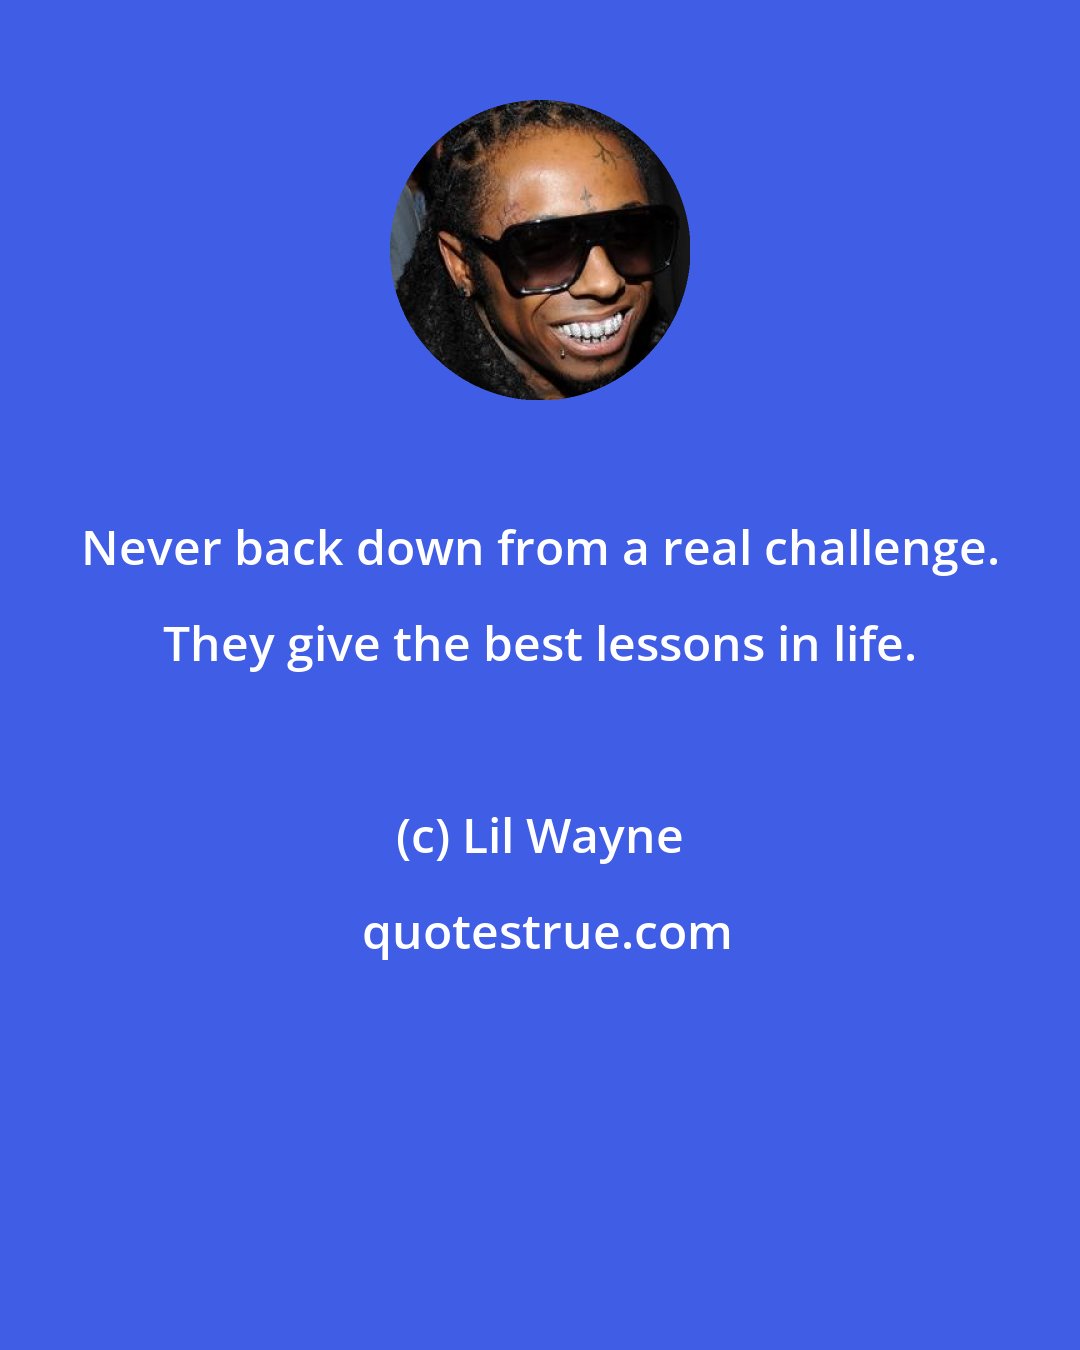 Lil Wayne: Never back down from a real challenge. They give the best lessons in life.